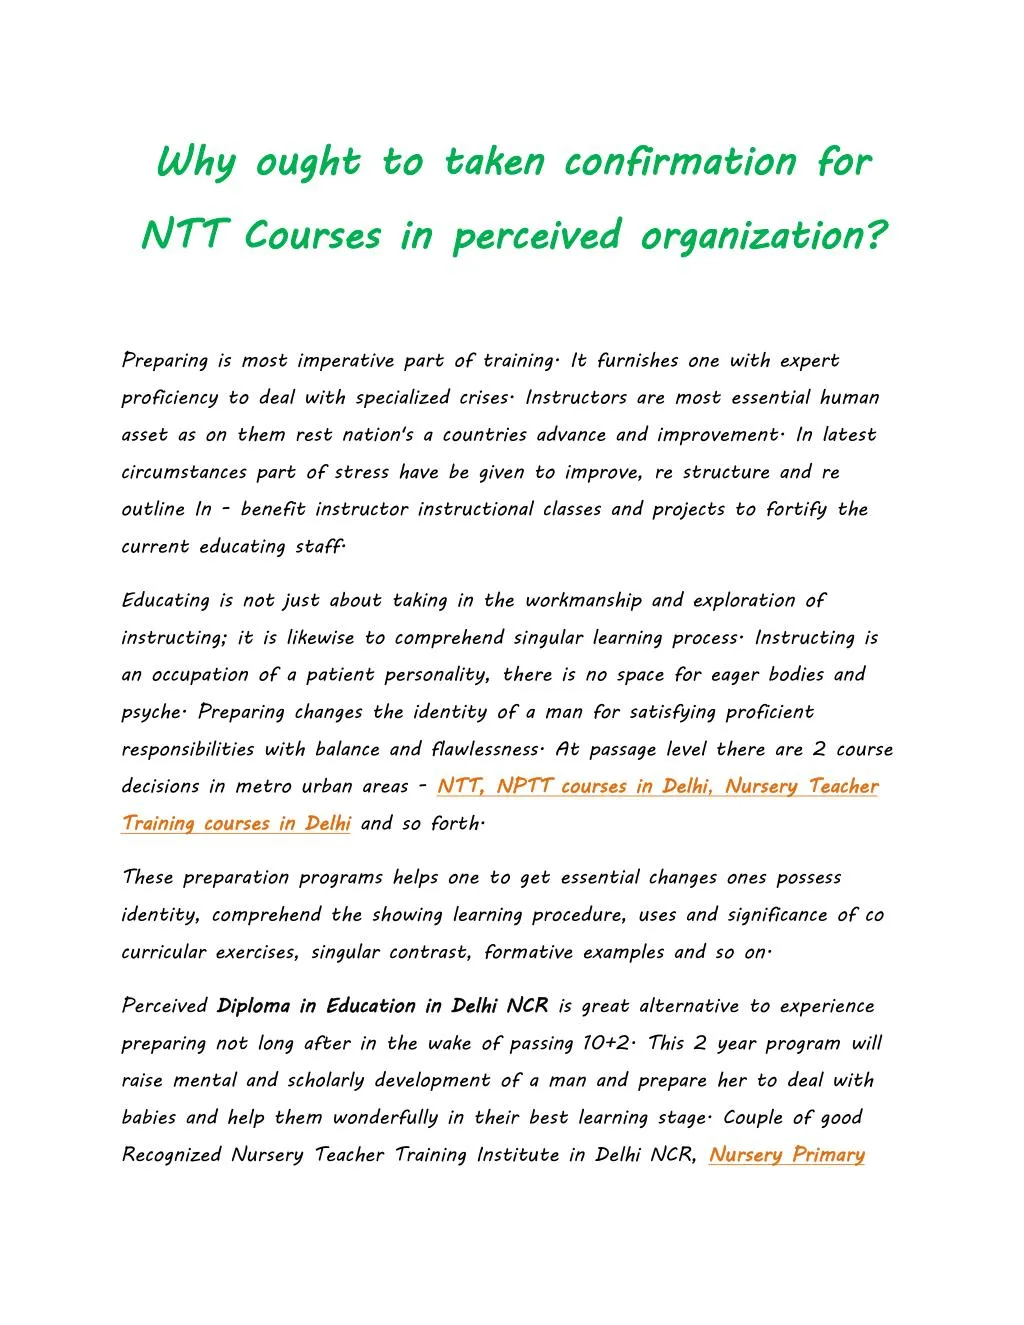 why ought to taken confirmation for ntt courses